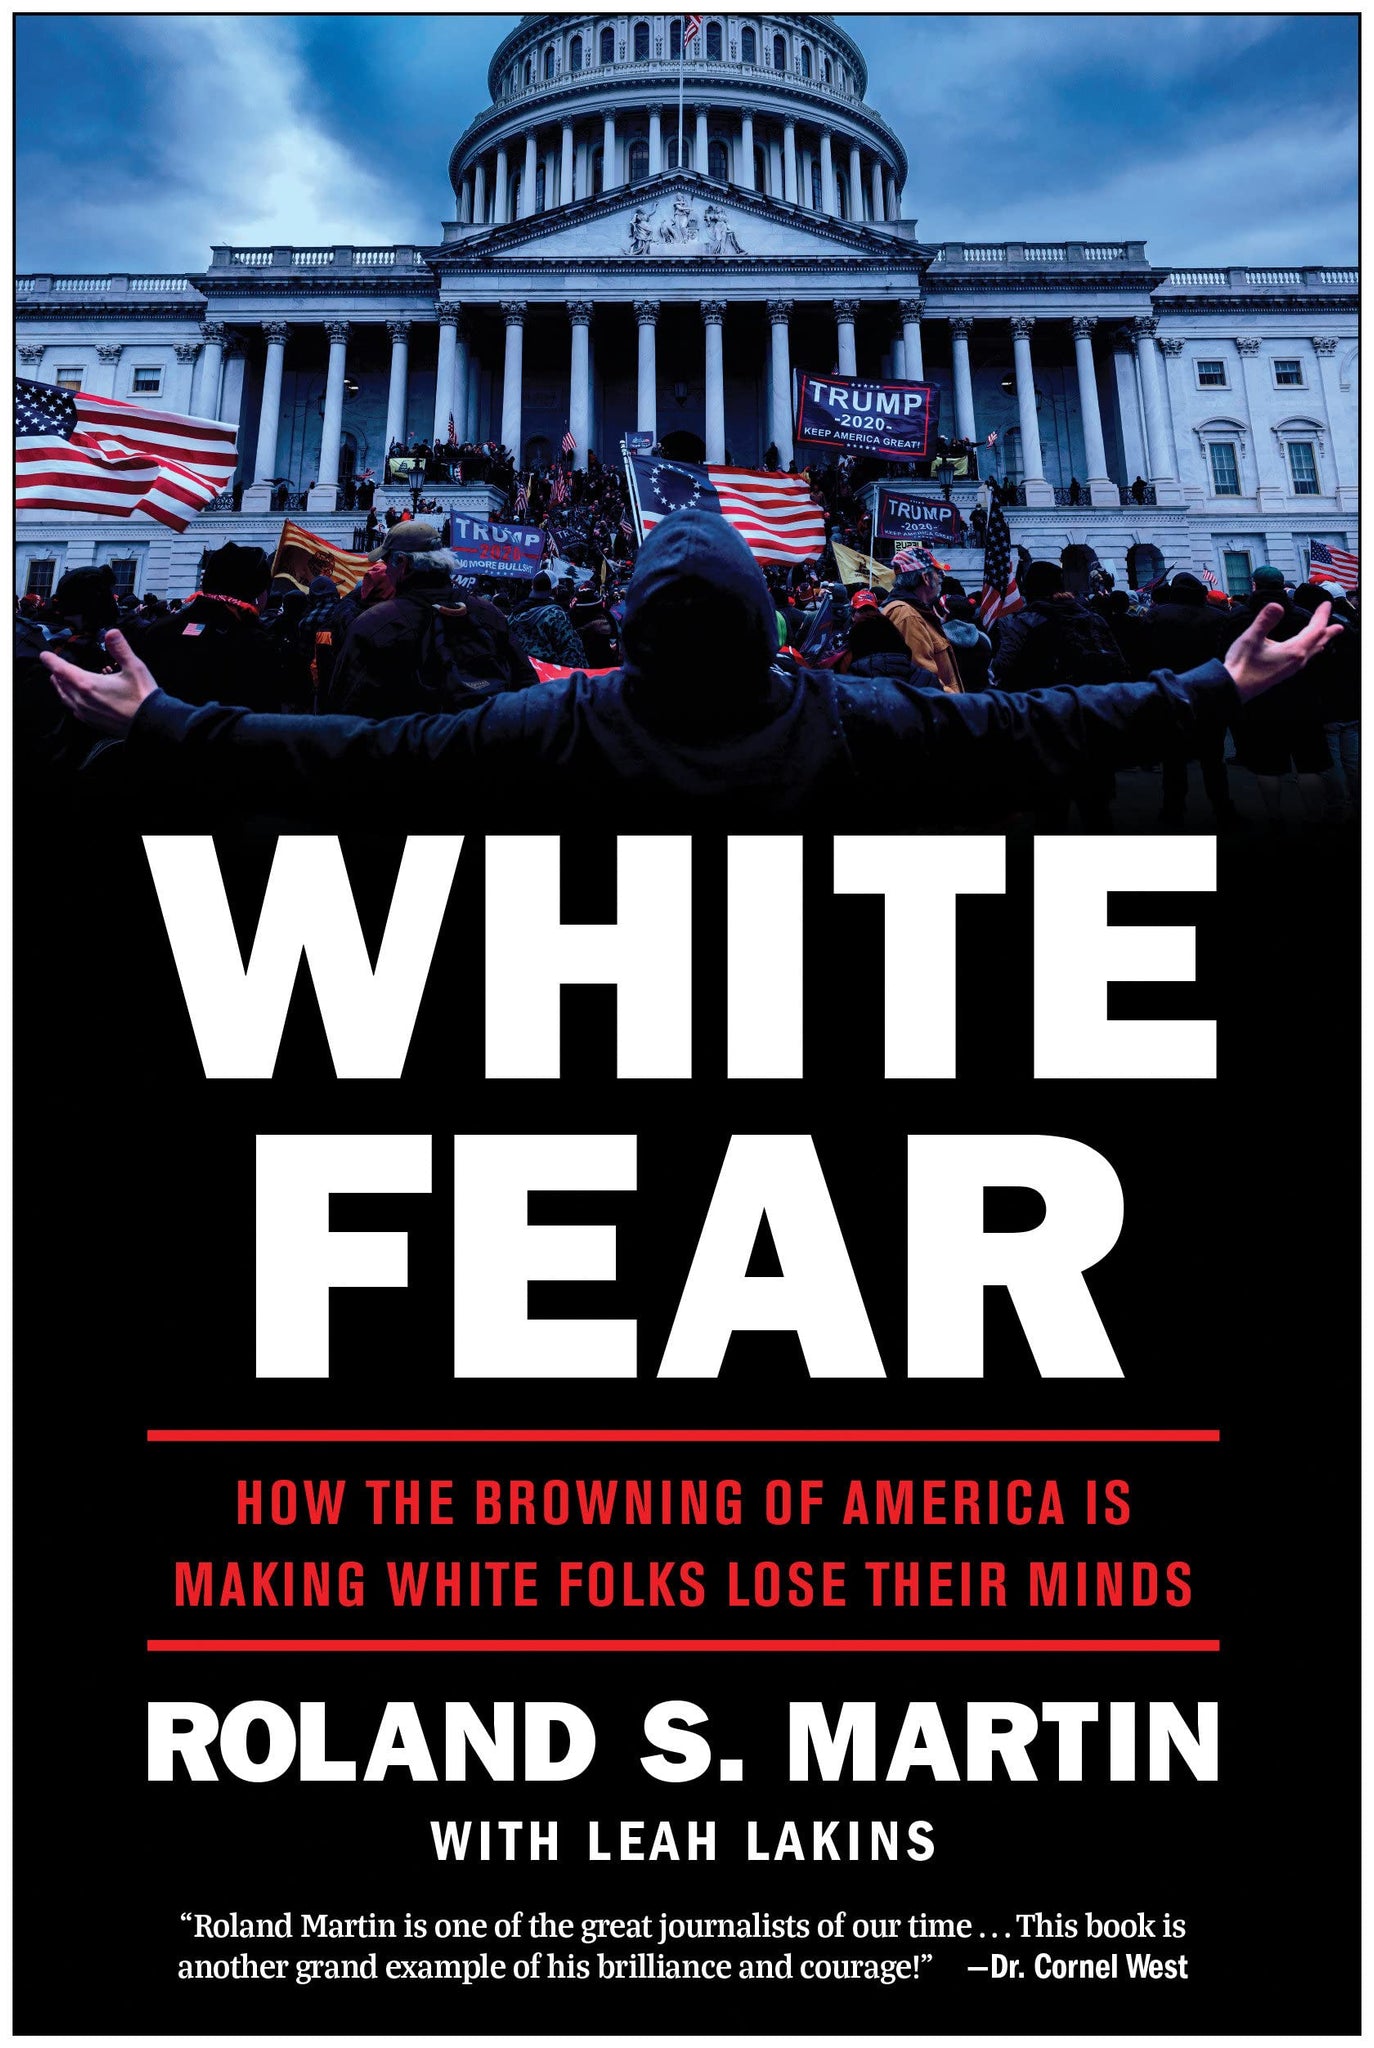 White Fear: How the Browning of America Is Making White Folks Lose Their Minds (Hardcover)